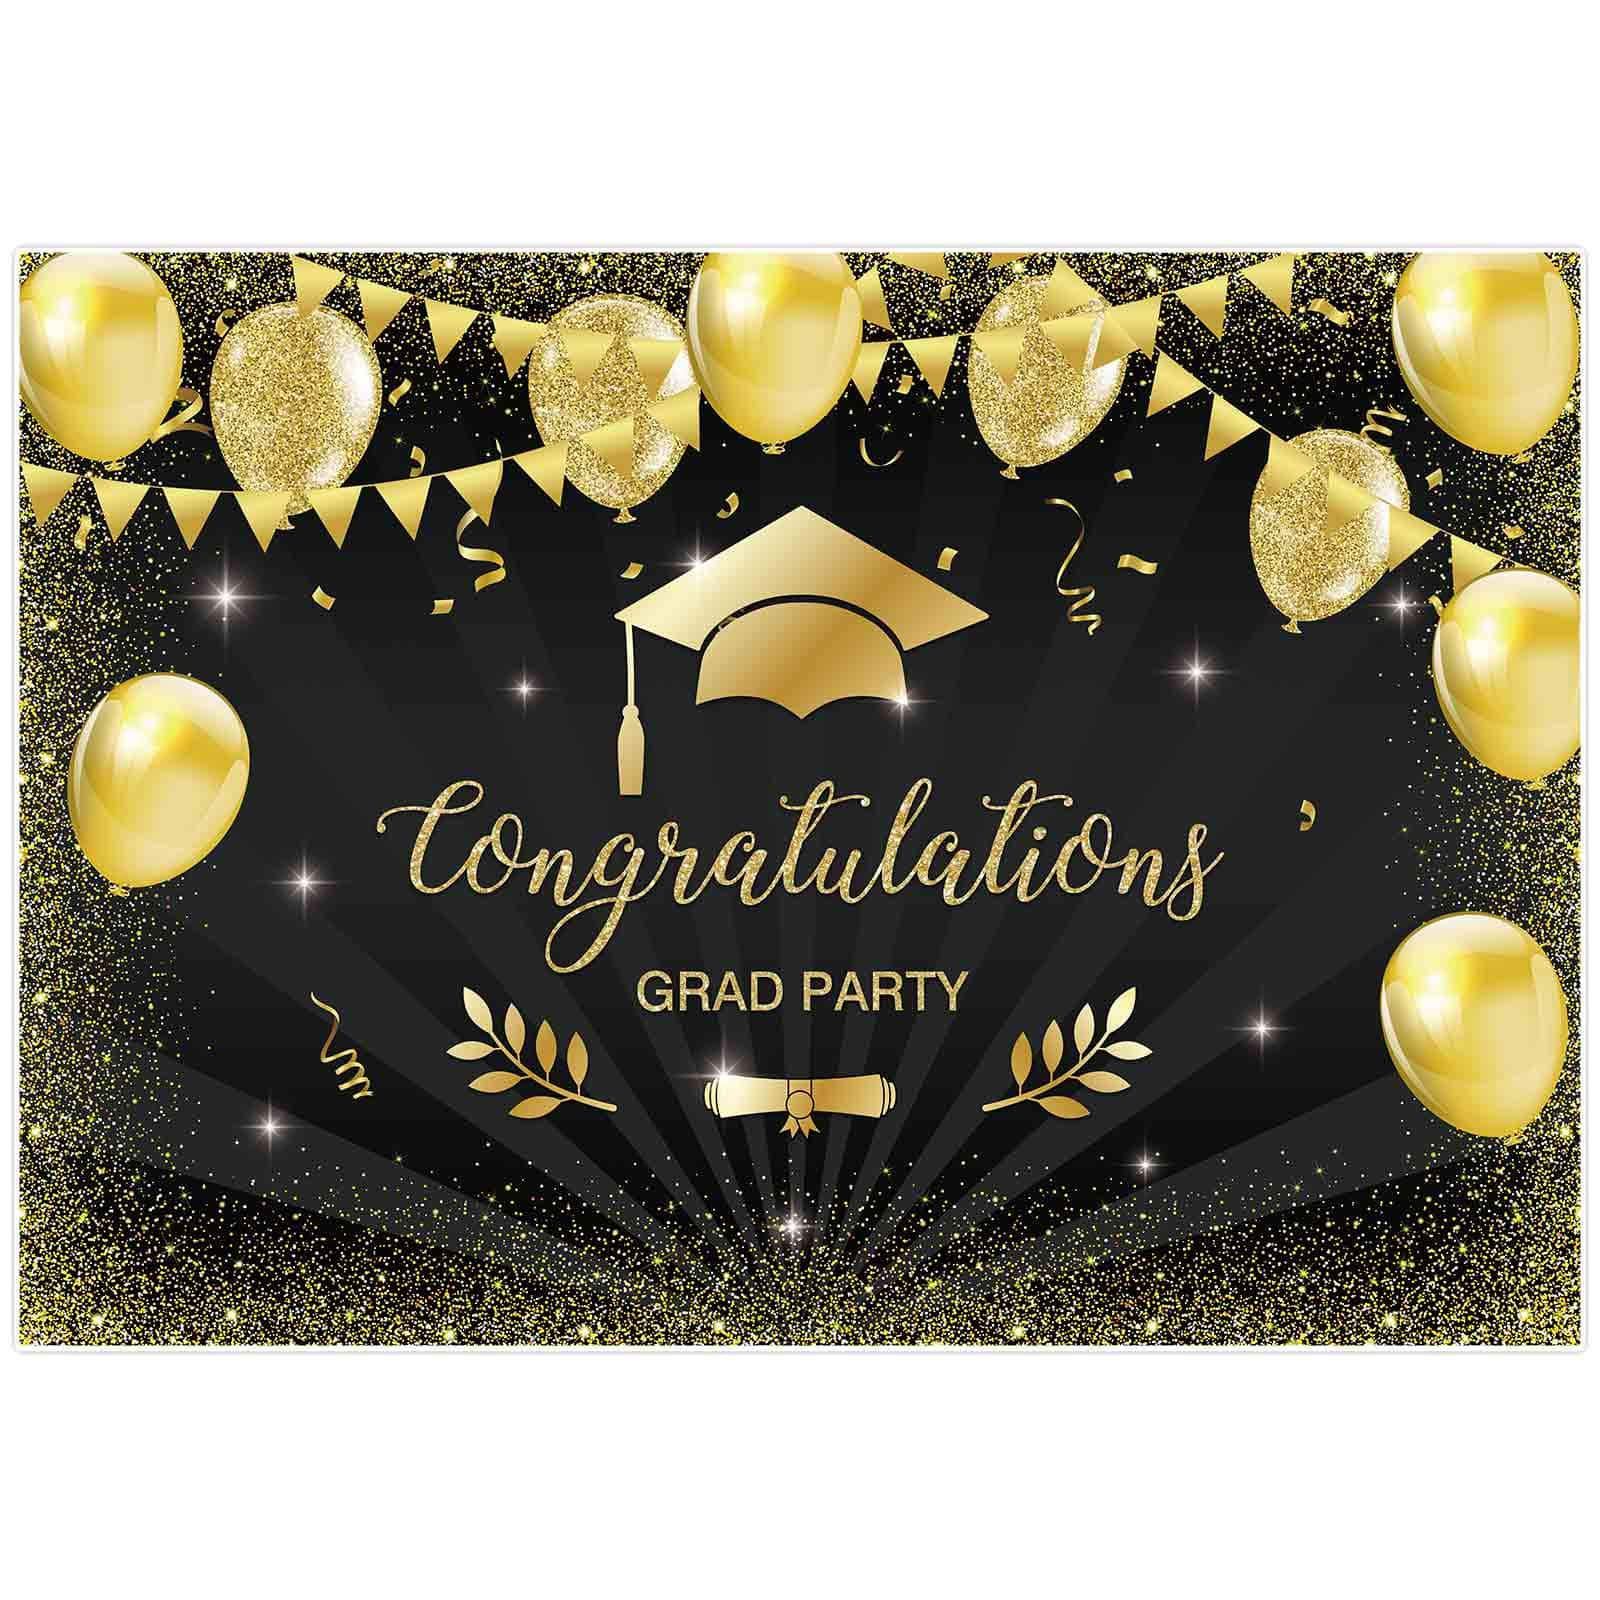 Congratulatory Greeting Gold And Black Background